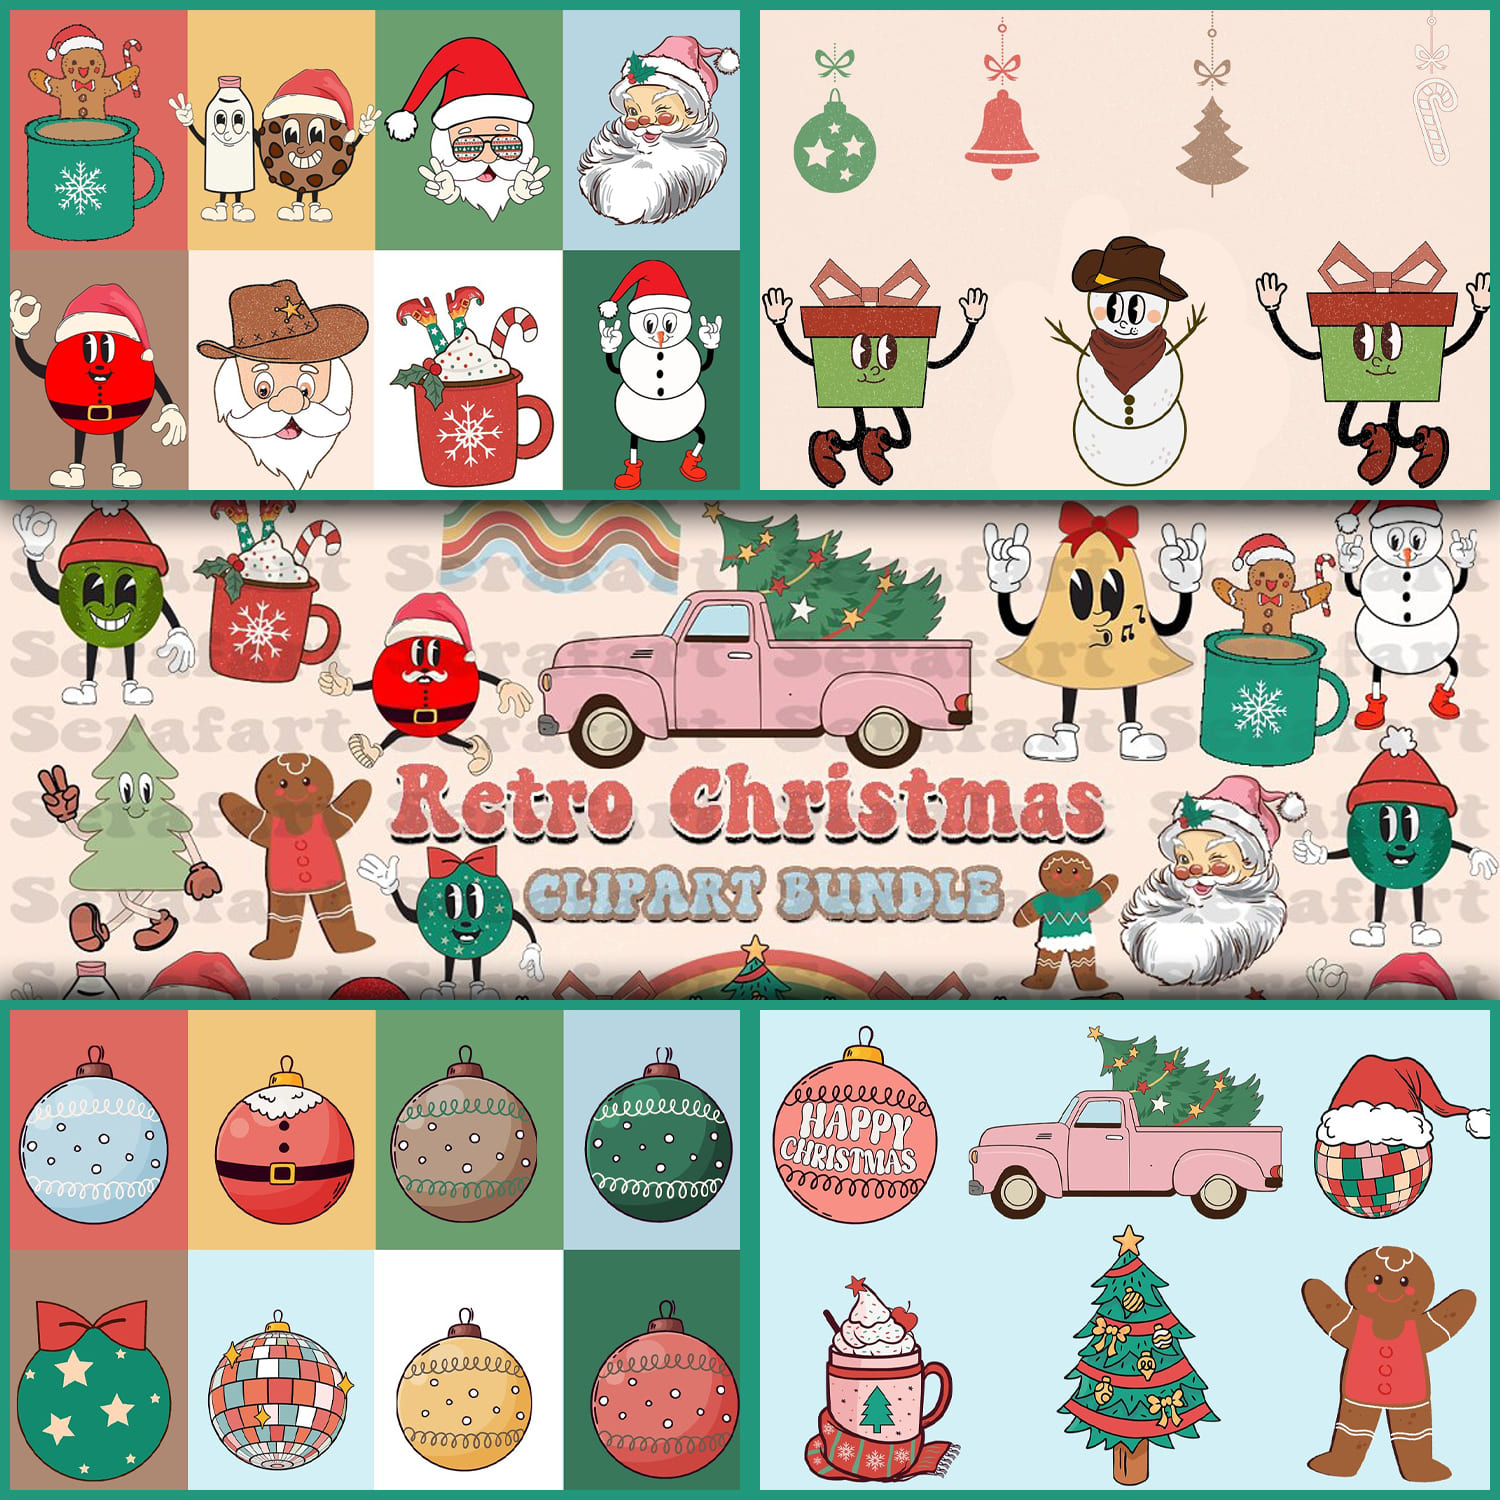 Image of Christmas cookies and warm milk, snowmen and presents in retro style.